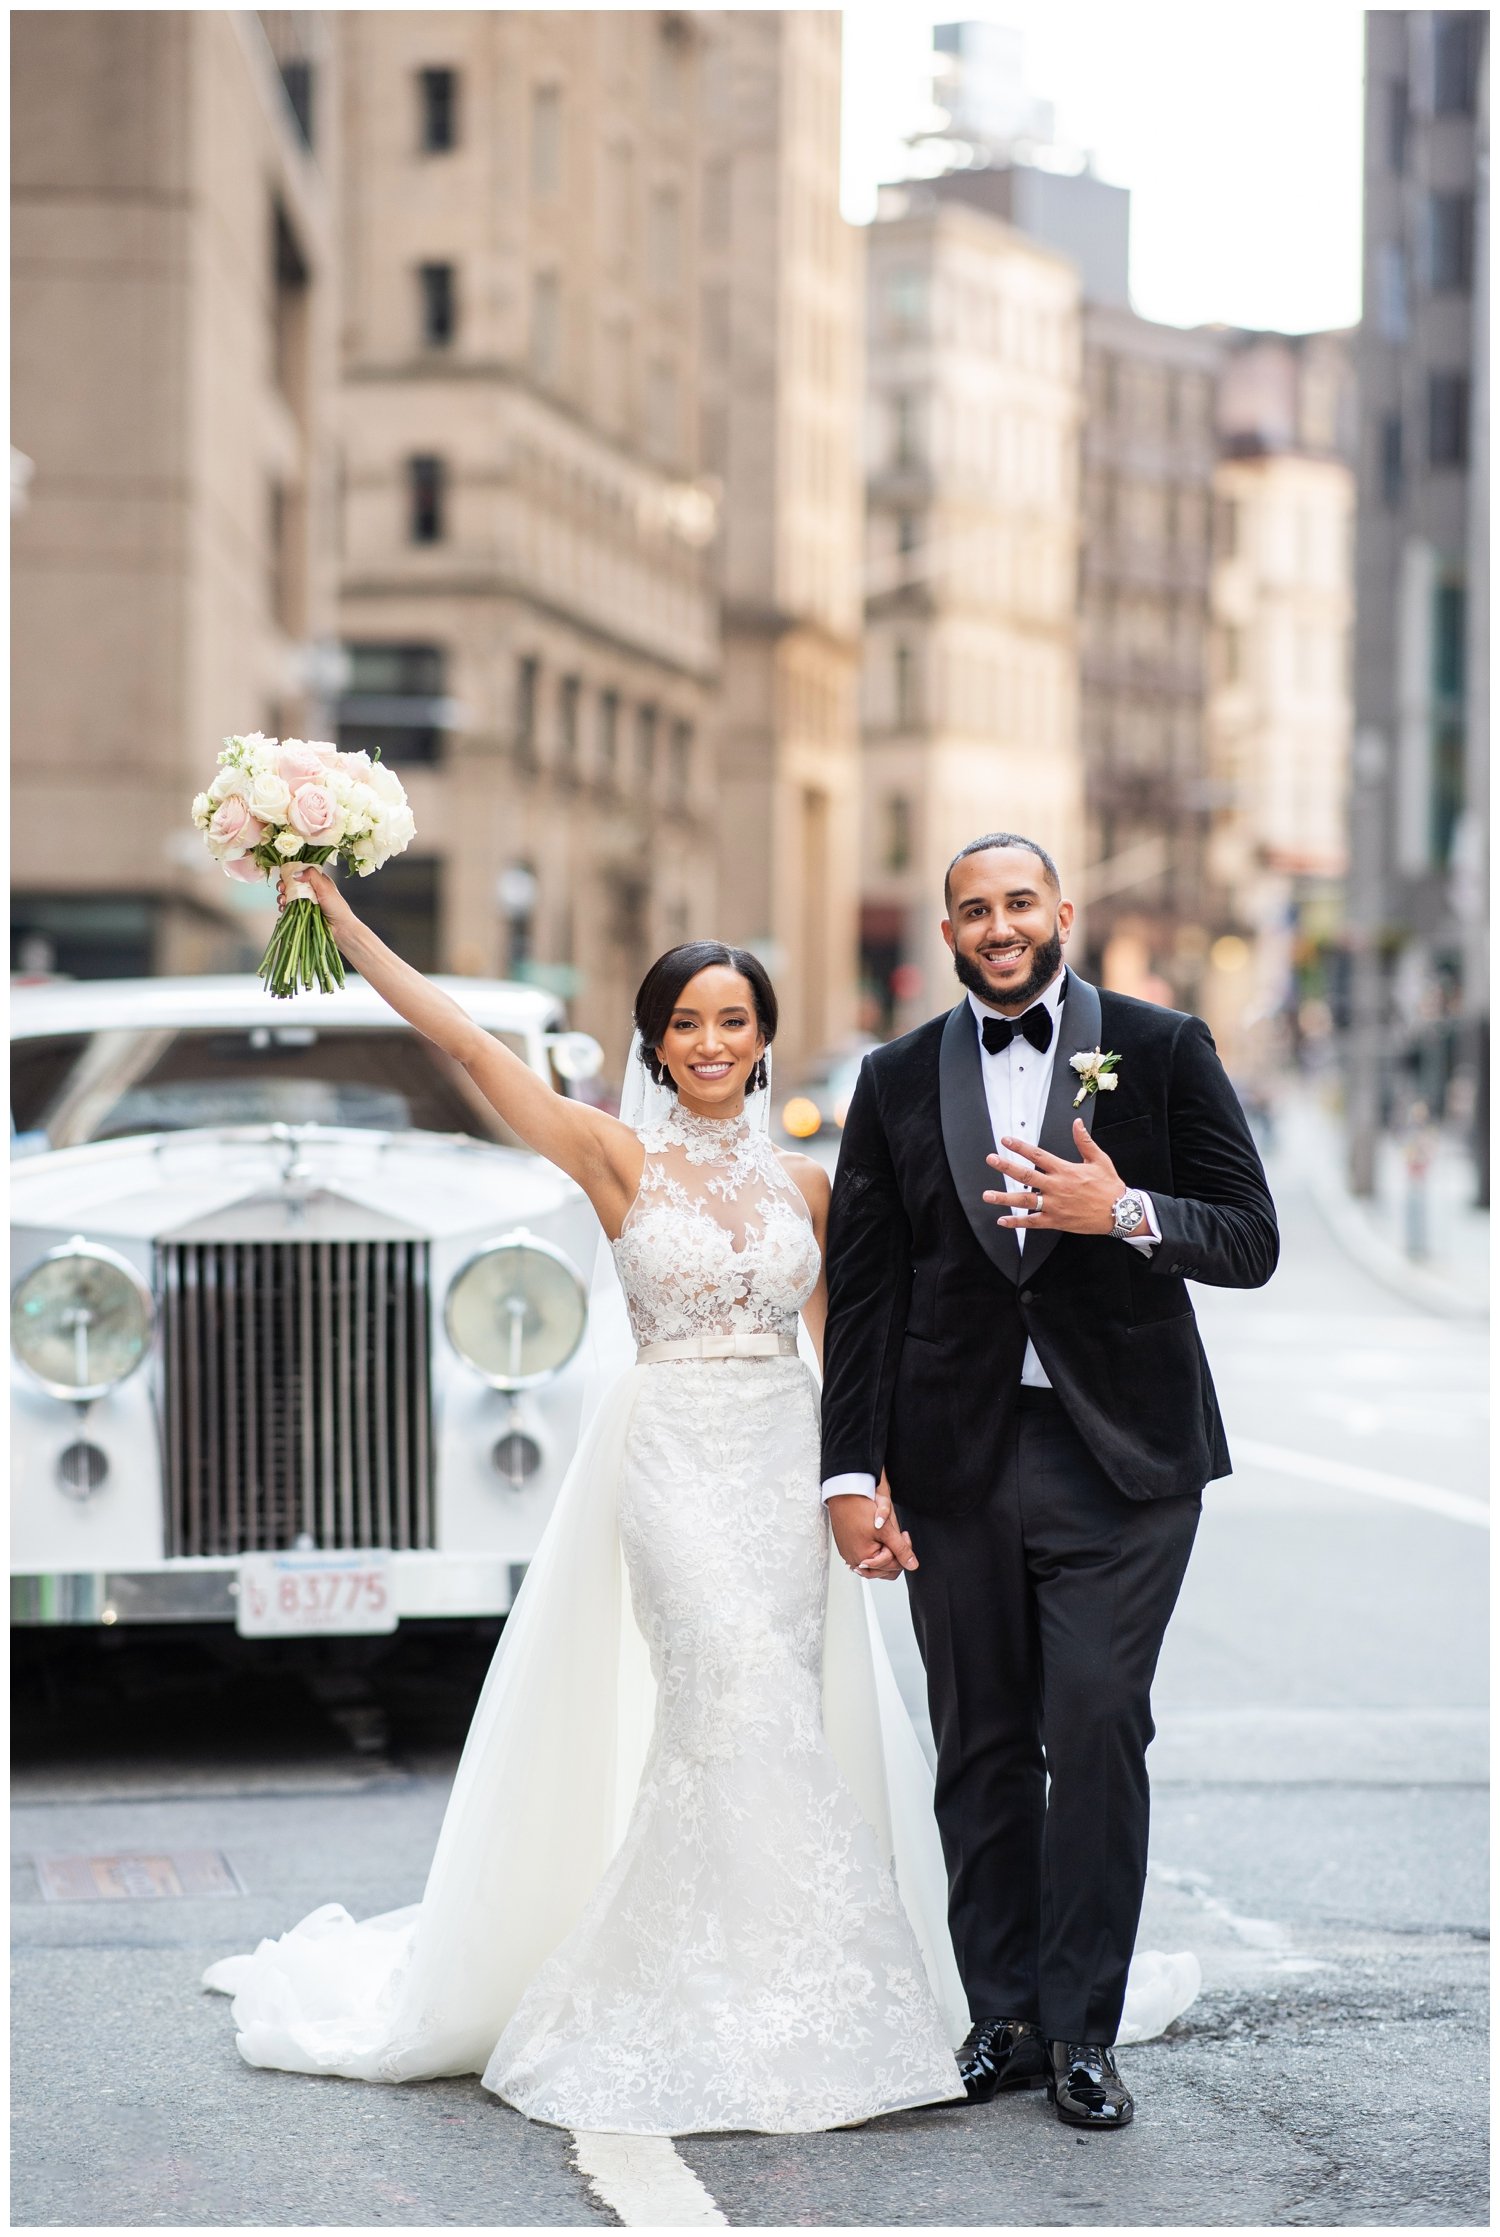 bride and groom celebrating portrait after Fairmont Copley Plaza wedding ceremony in Boston